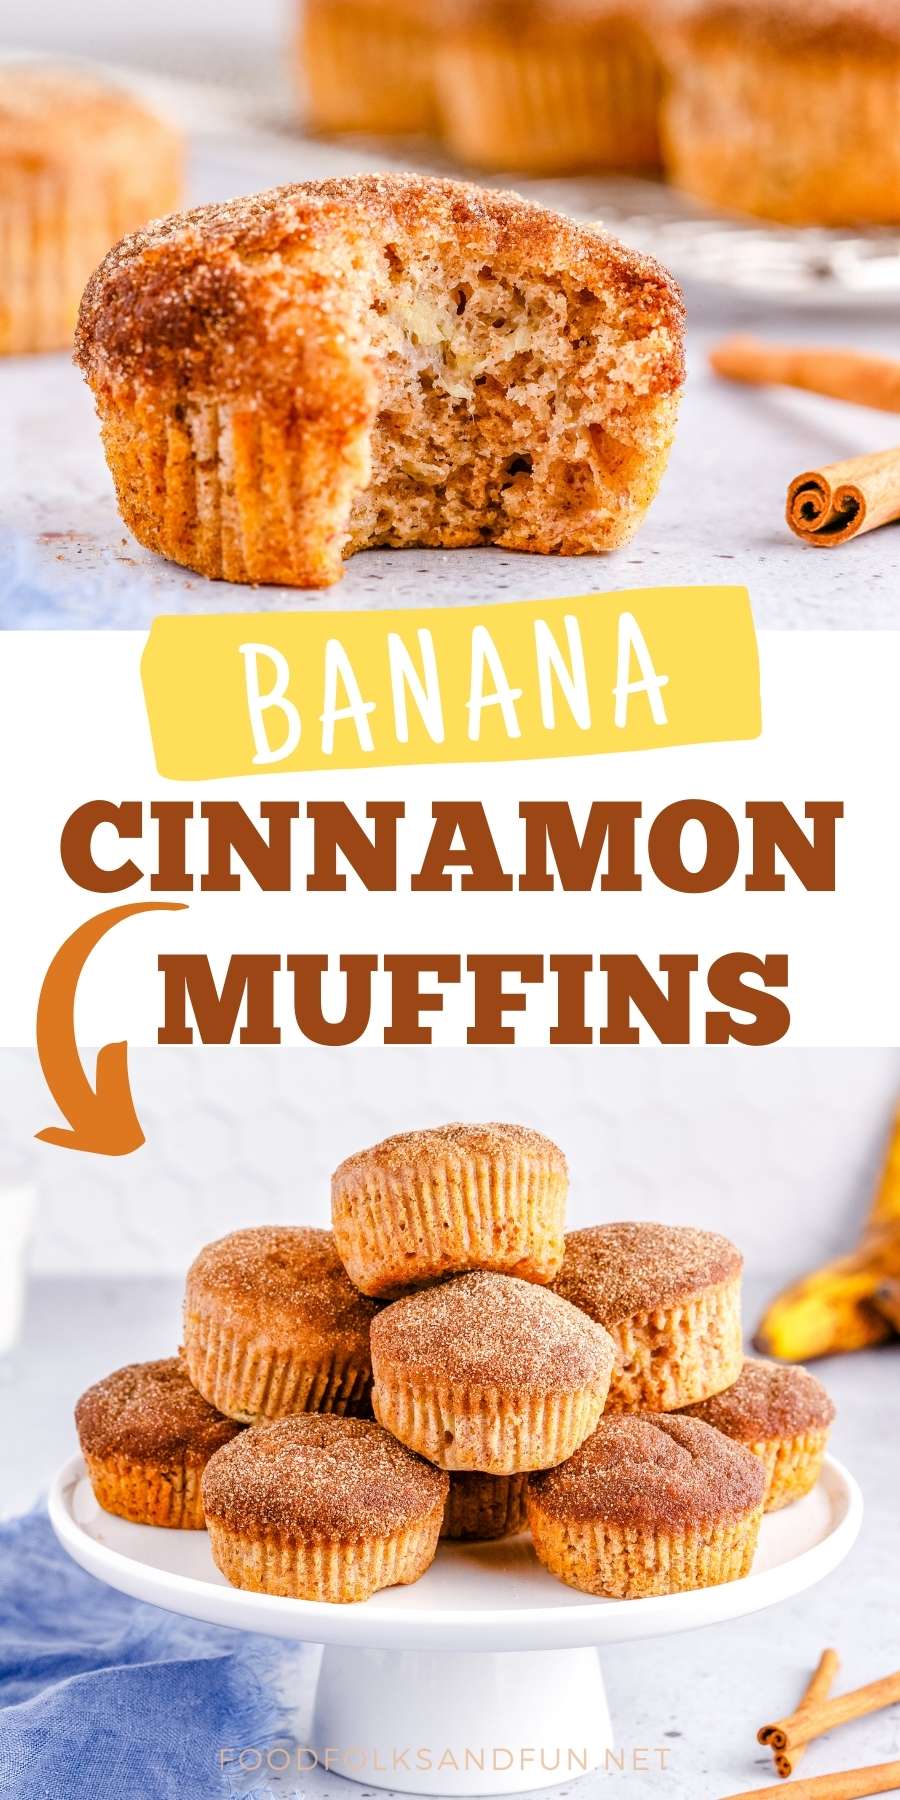 These Banana Cinnamon Muffins are quick, easy to make, and perfect for all-year-round enjoyment. The cinnamon-sugar topping adds a little additional sweetness to the banana flavor. via @foodfolksandfun